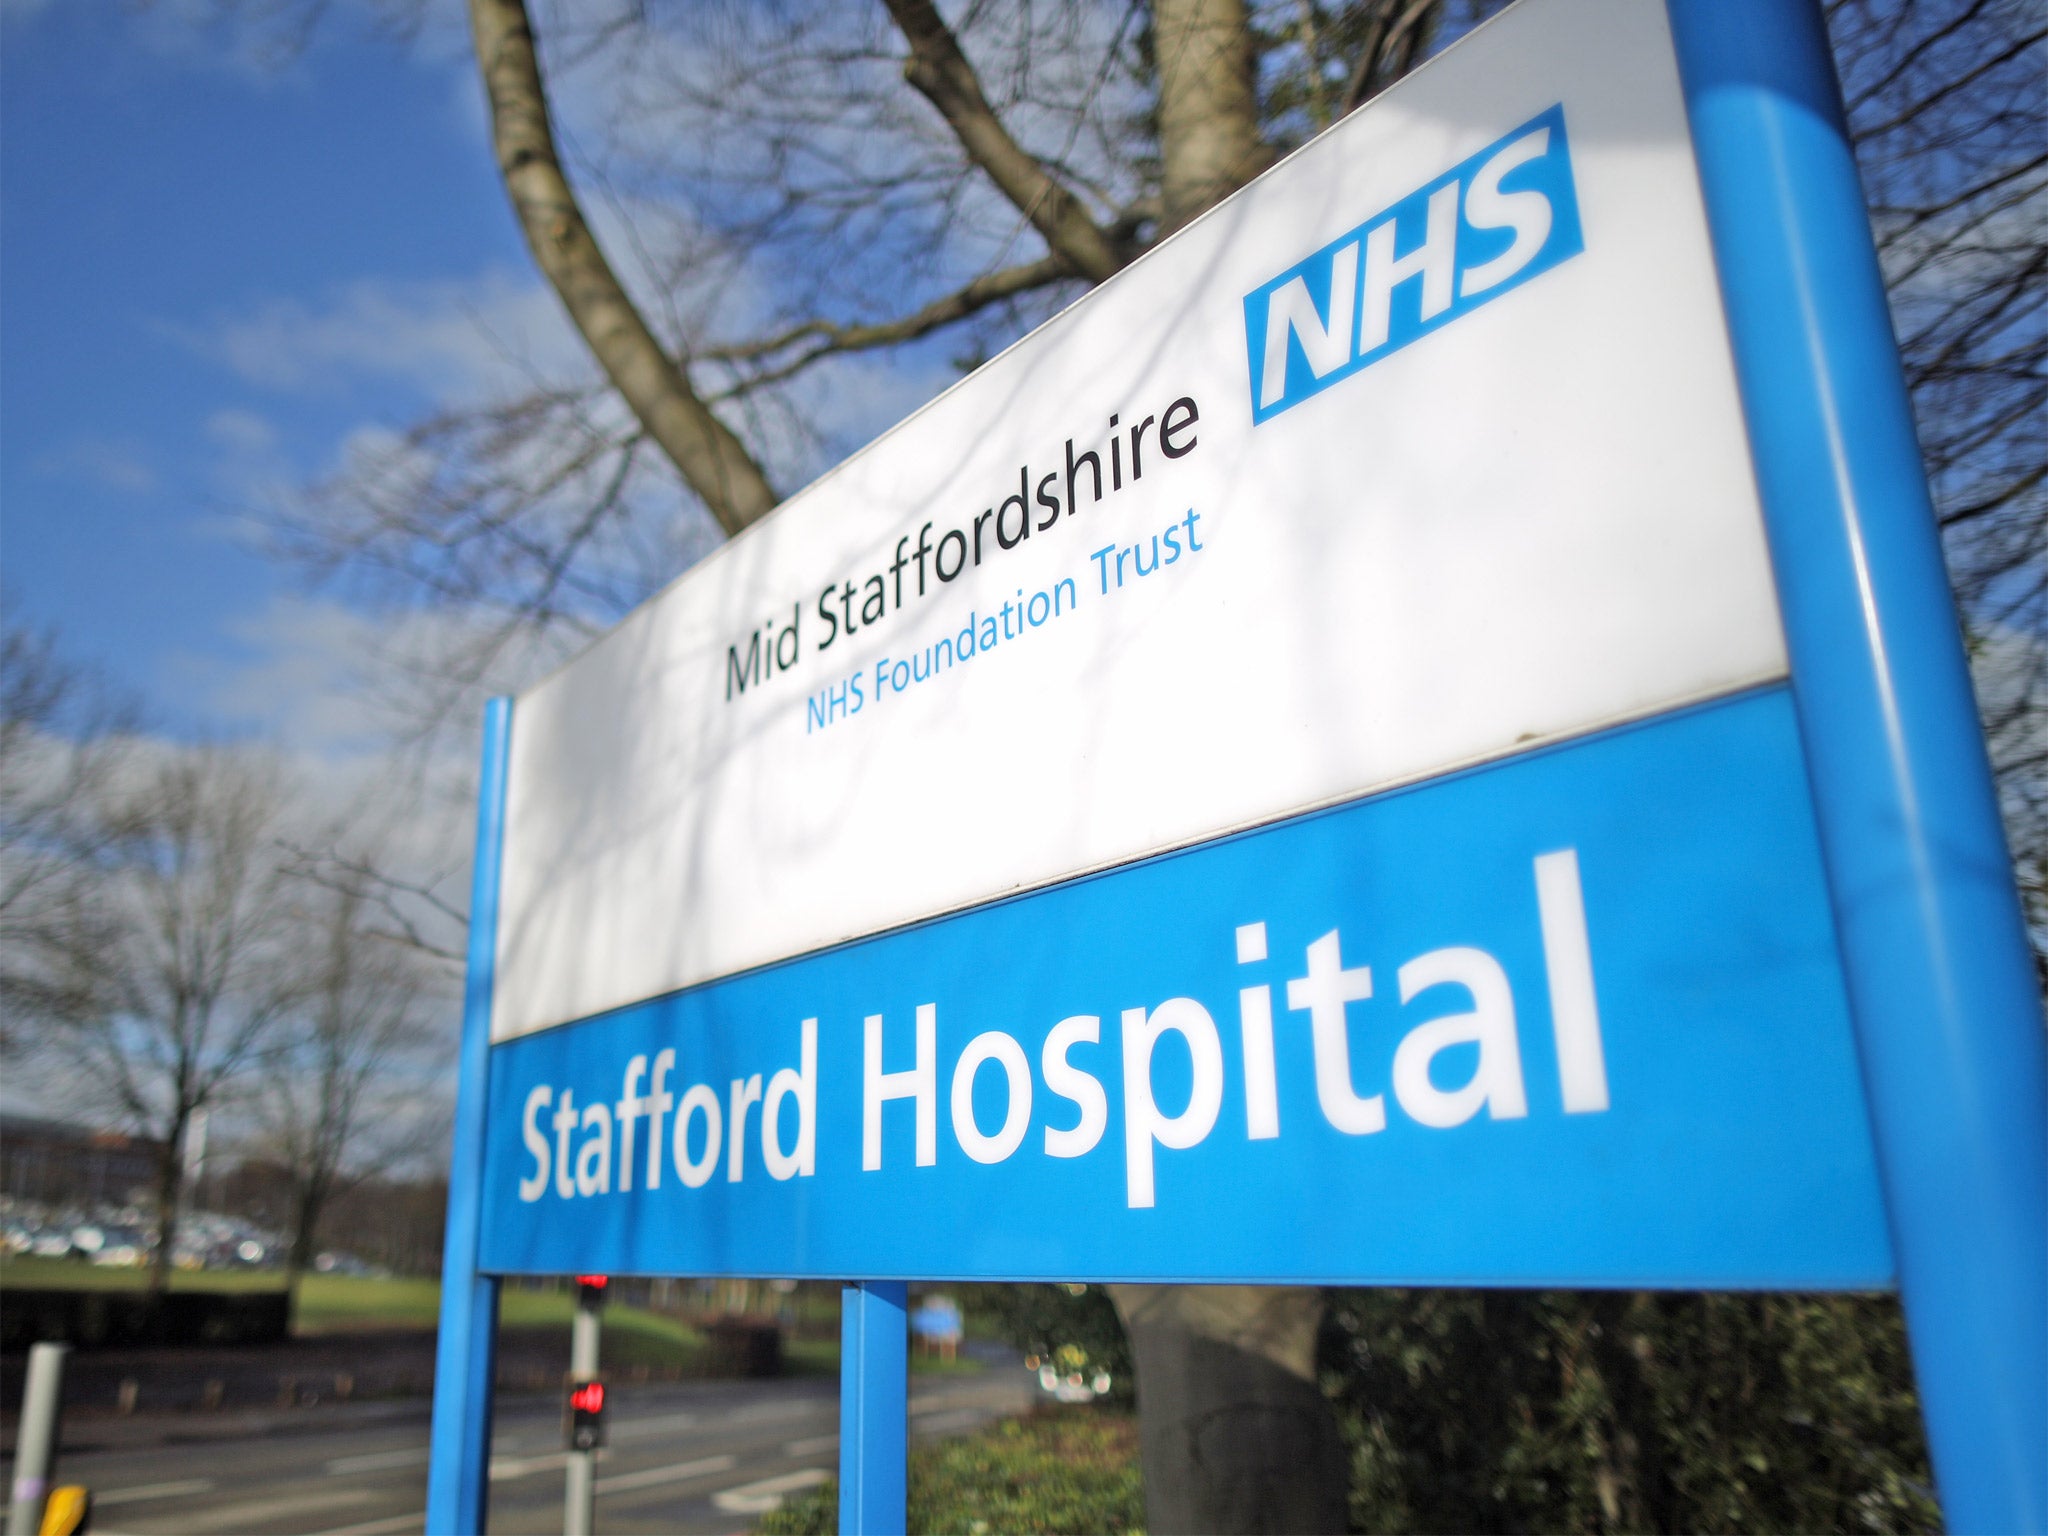 Stafford Hospital, where the trust has been the focus of controversy